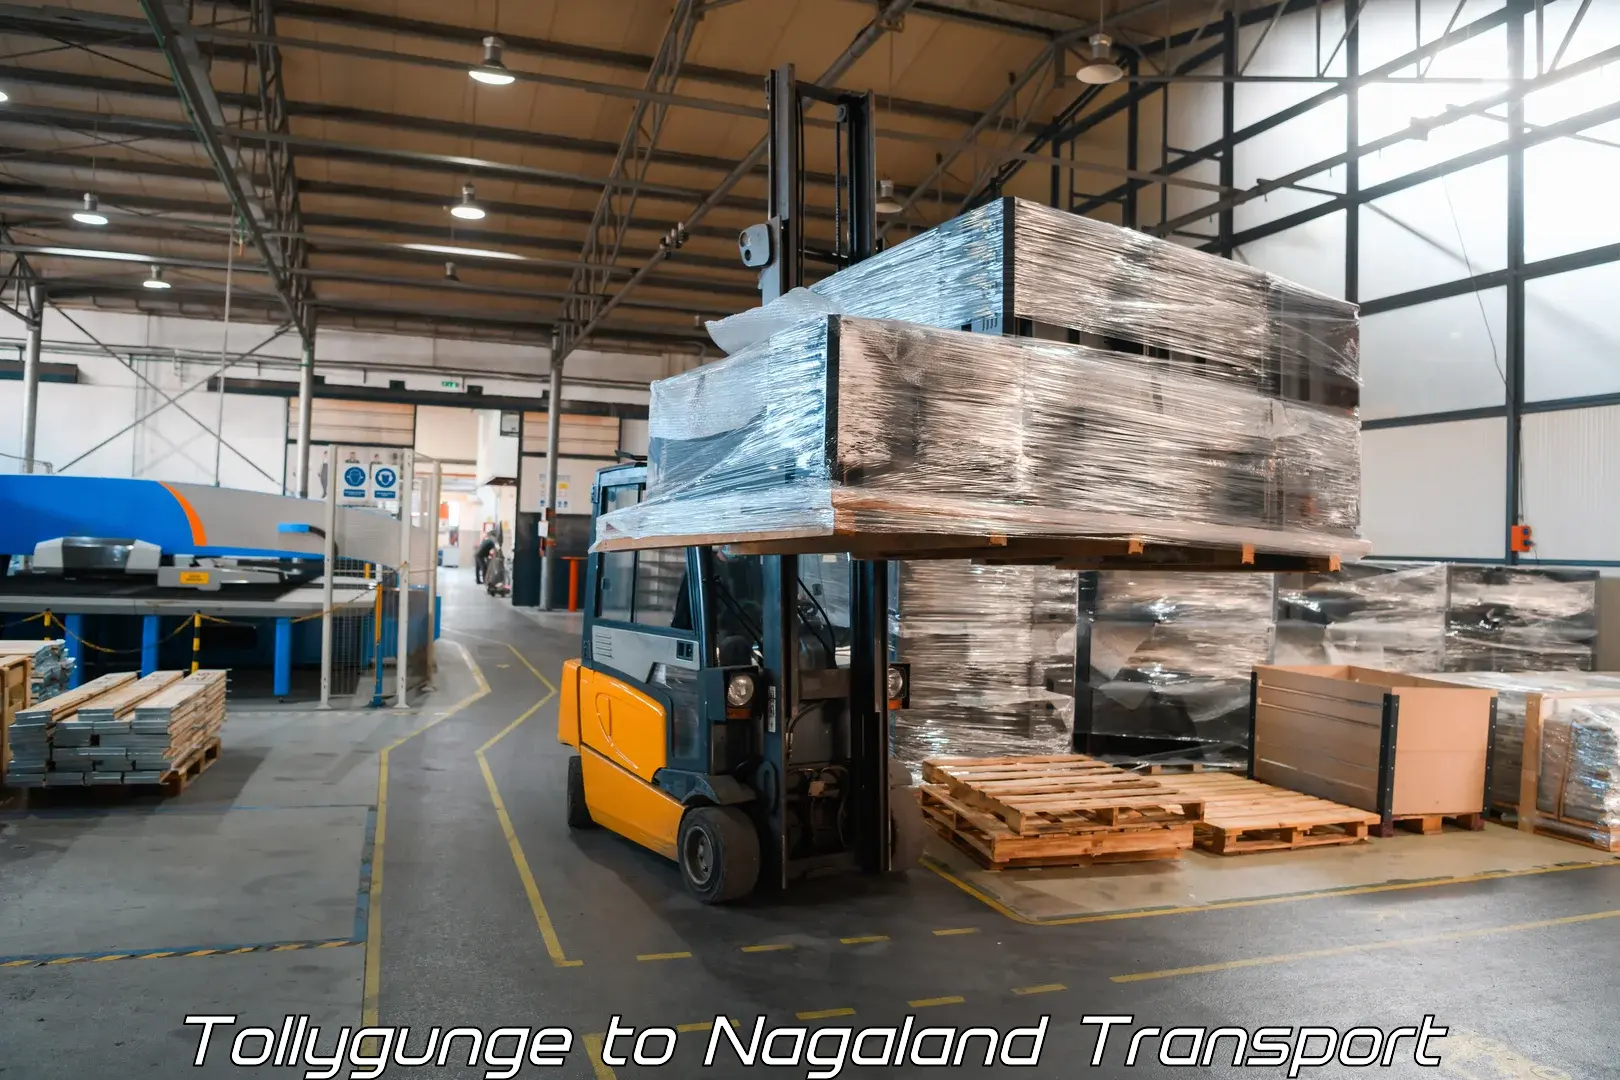 Lorry transport service Tollygunge to Nagaland